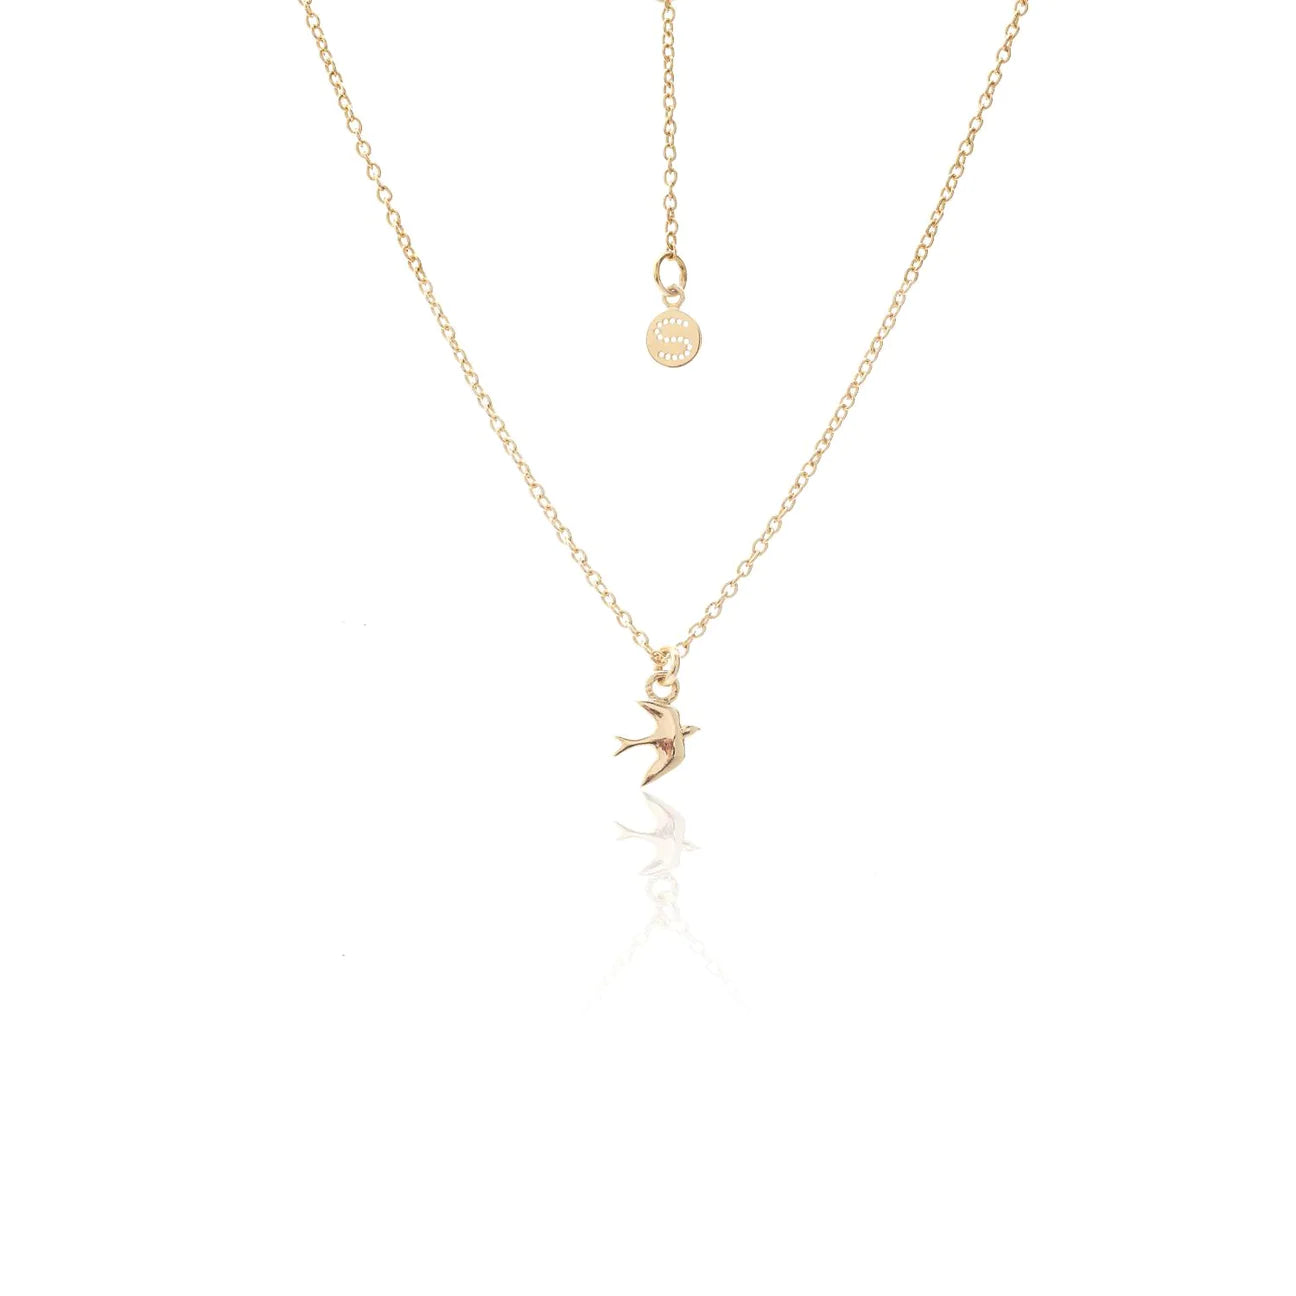 Swallow necklace - GP